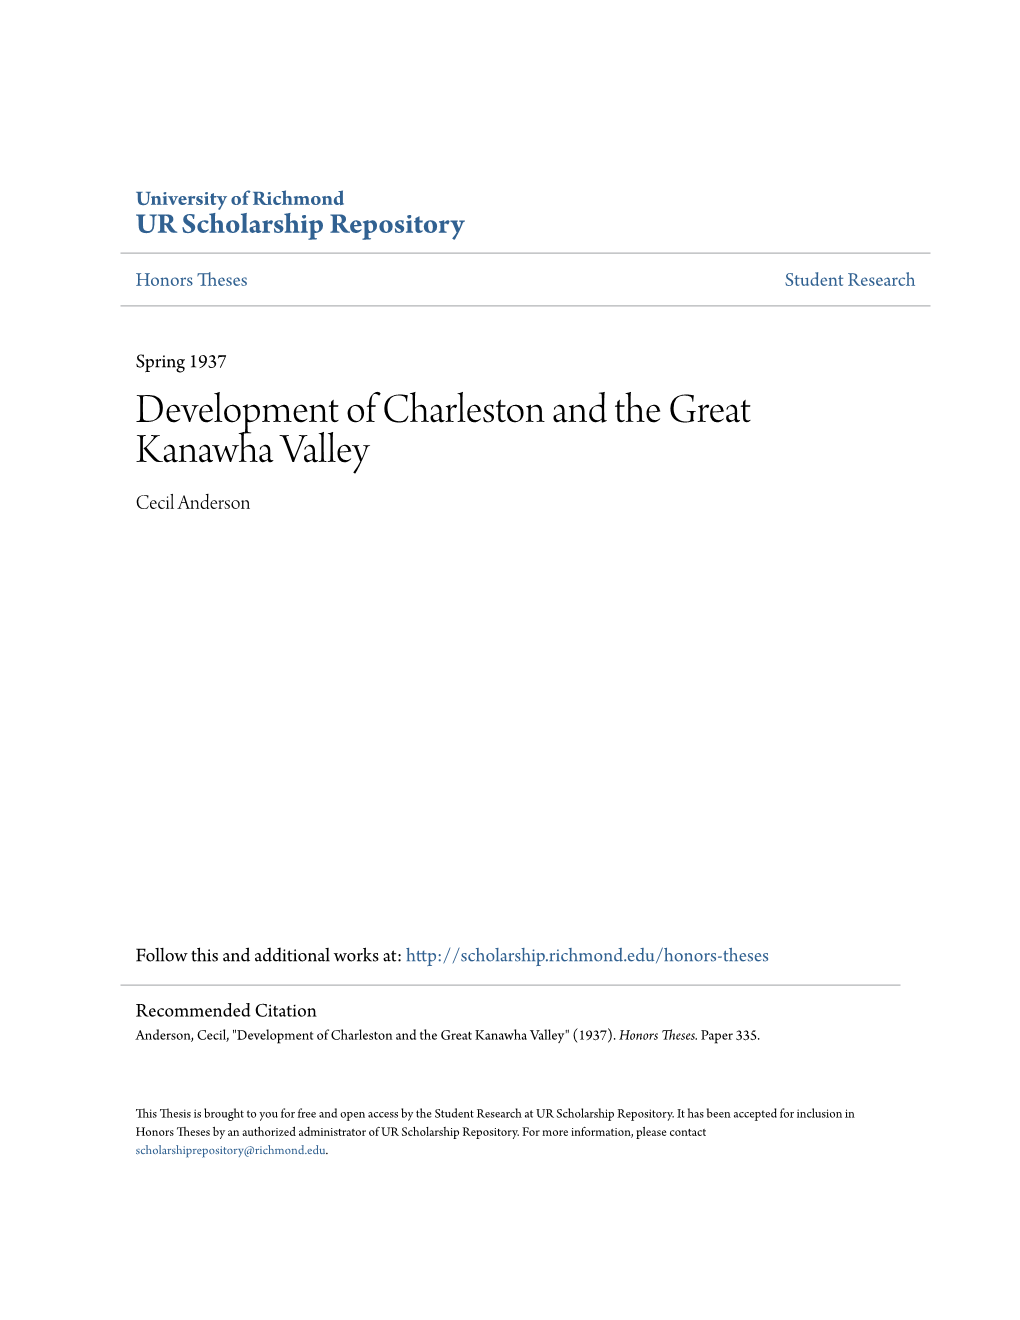 Development of Charleston and the Great Kanawha Valley Cecil Anderson